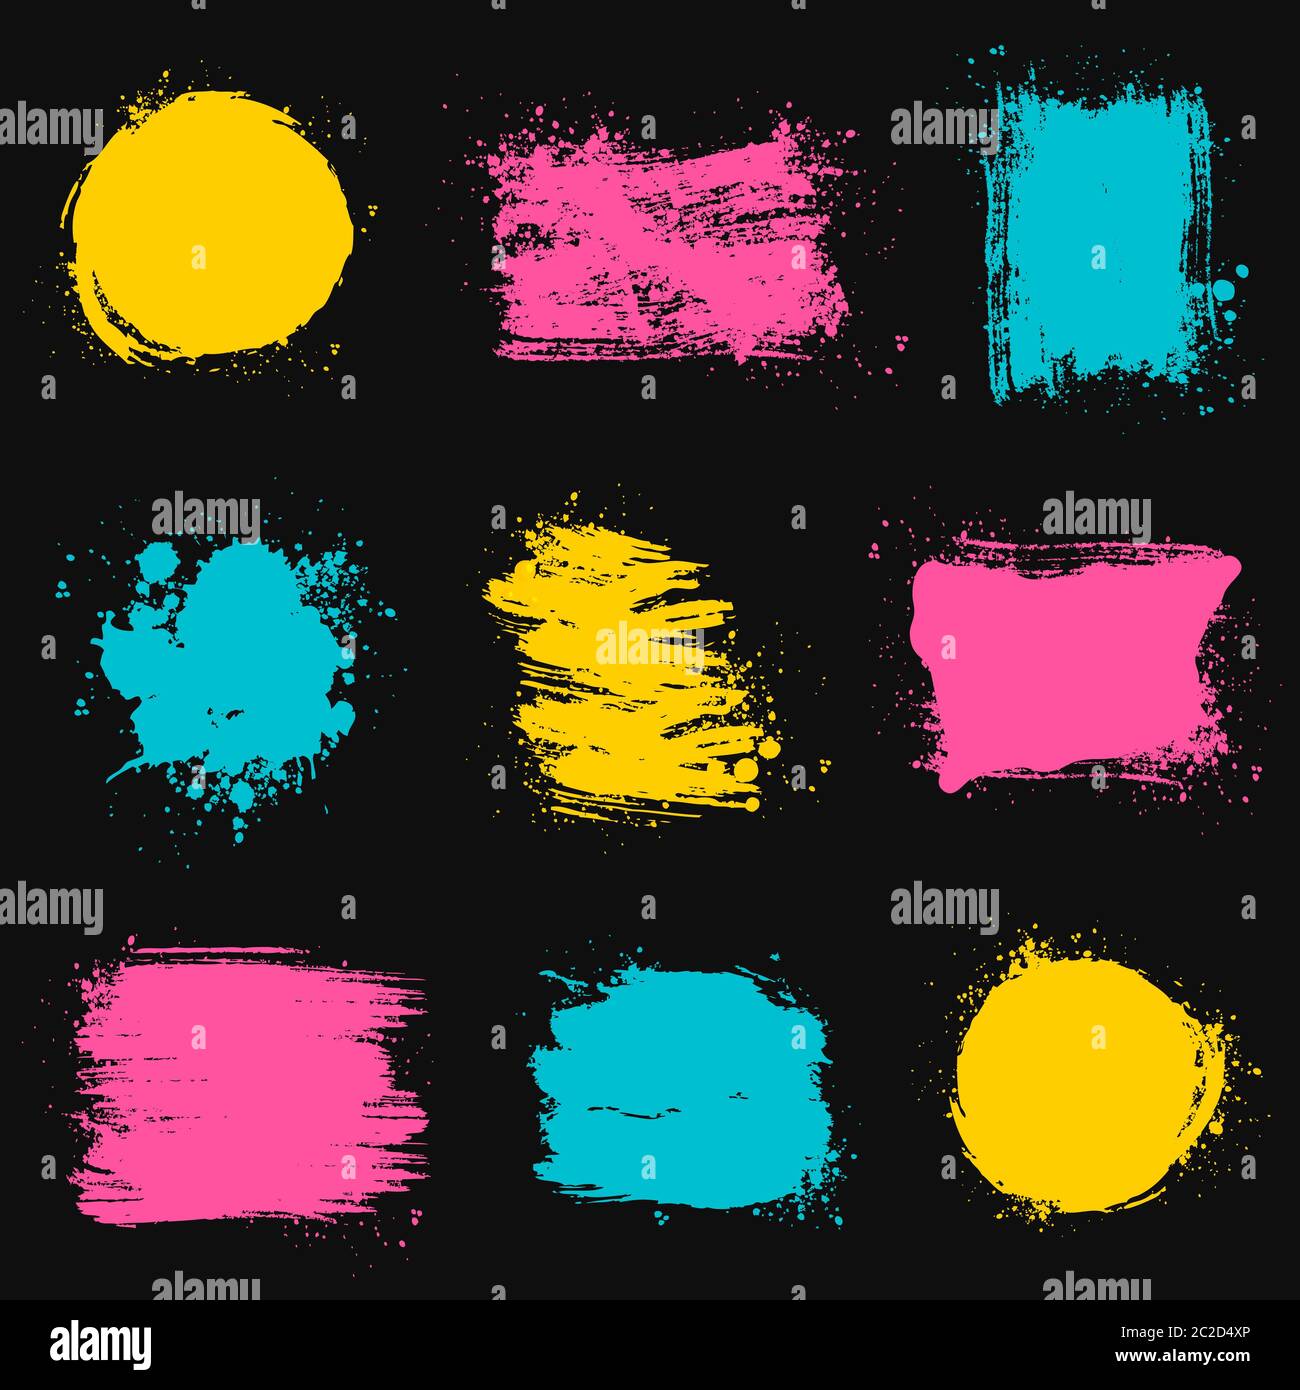 Paint brush stains, strokes, splatters and blots of different shapes and colors for frame, banner, label, text box or other art design. Stock Vector